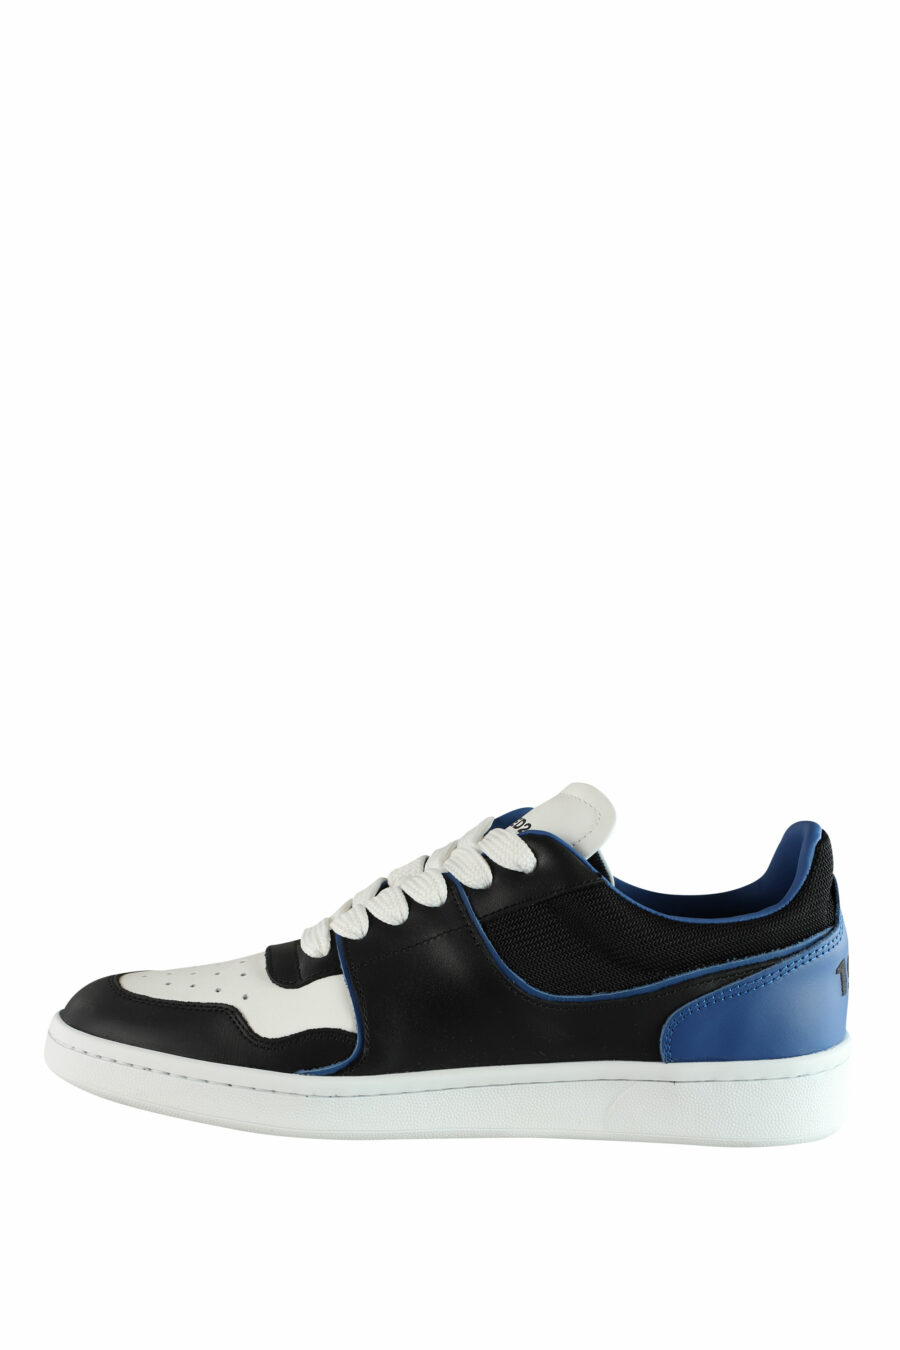 Bicolour black and blue "boxer" trainers with white details - IMG 1542